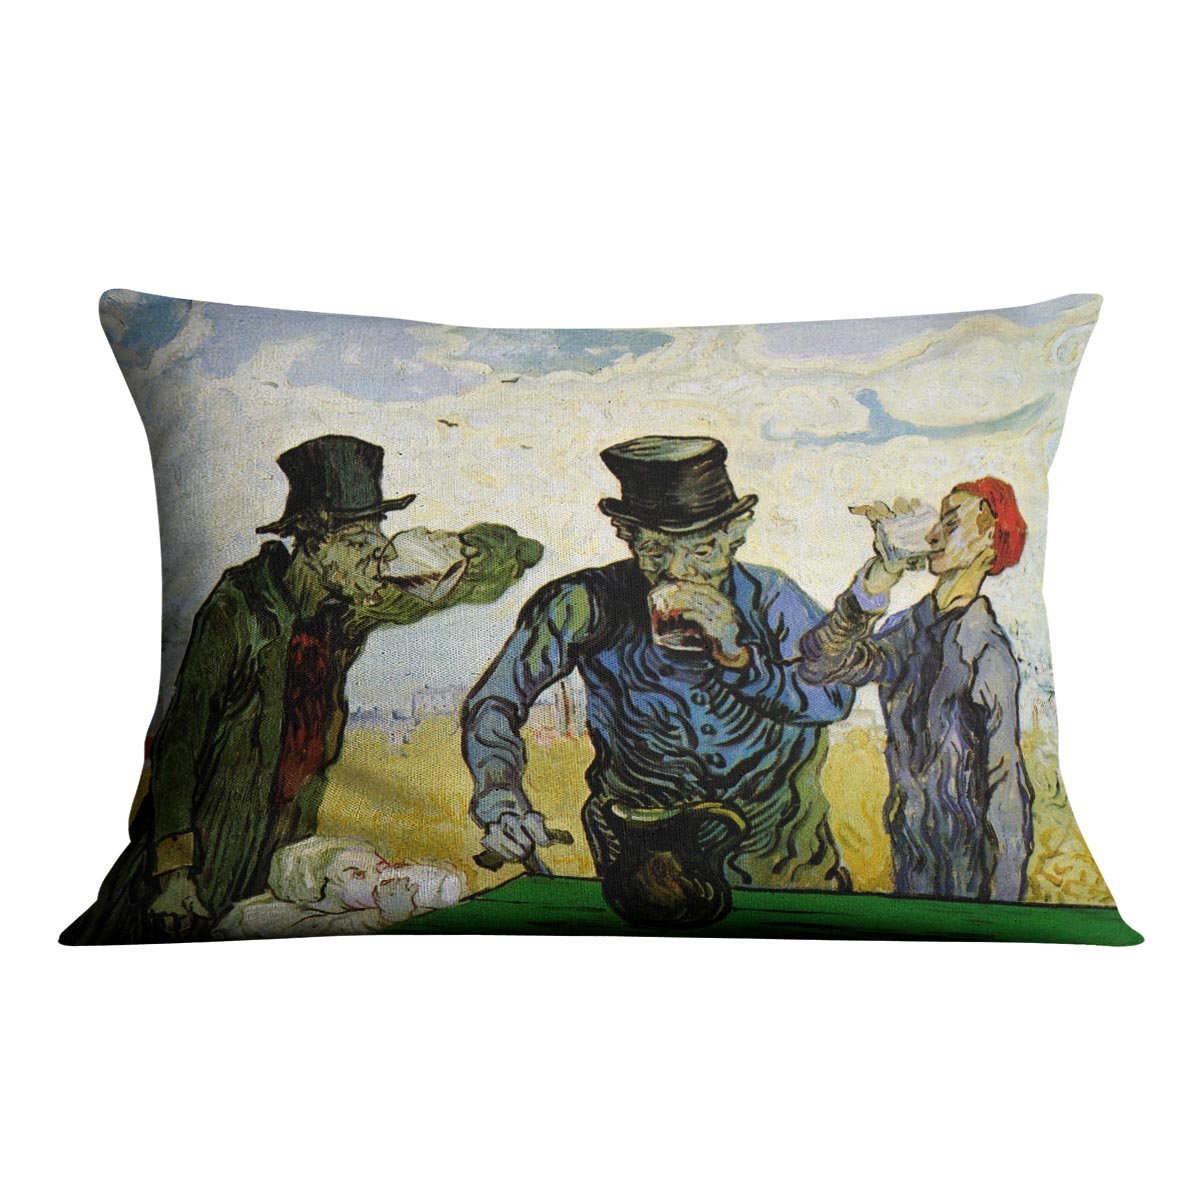 The Drinkers by Van Gogh Throw Pillow